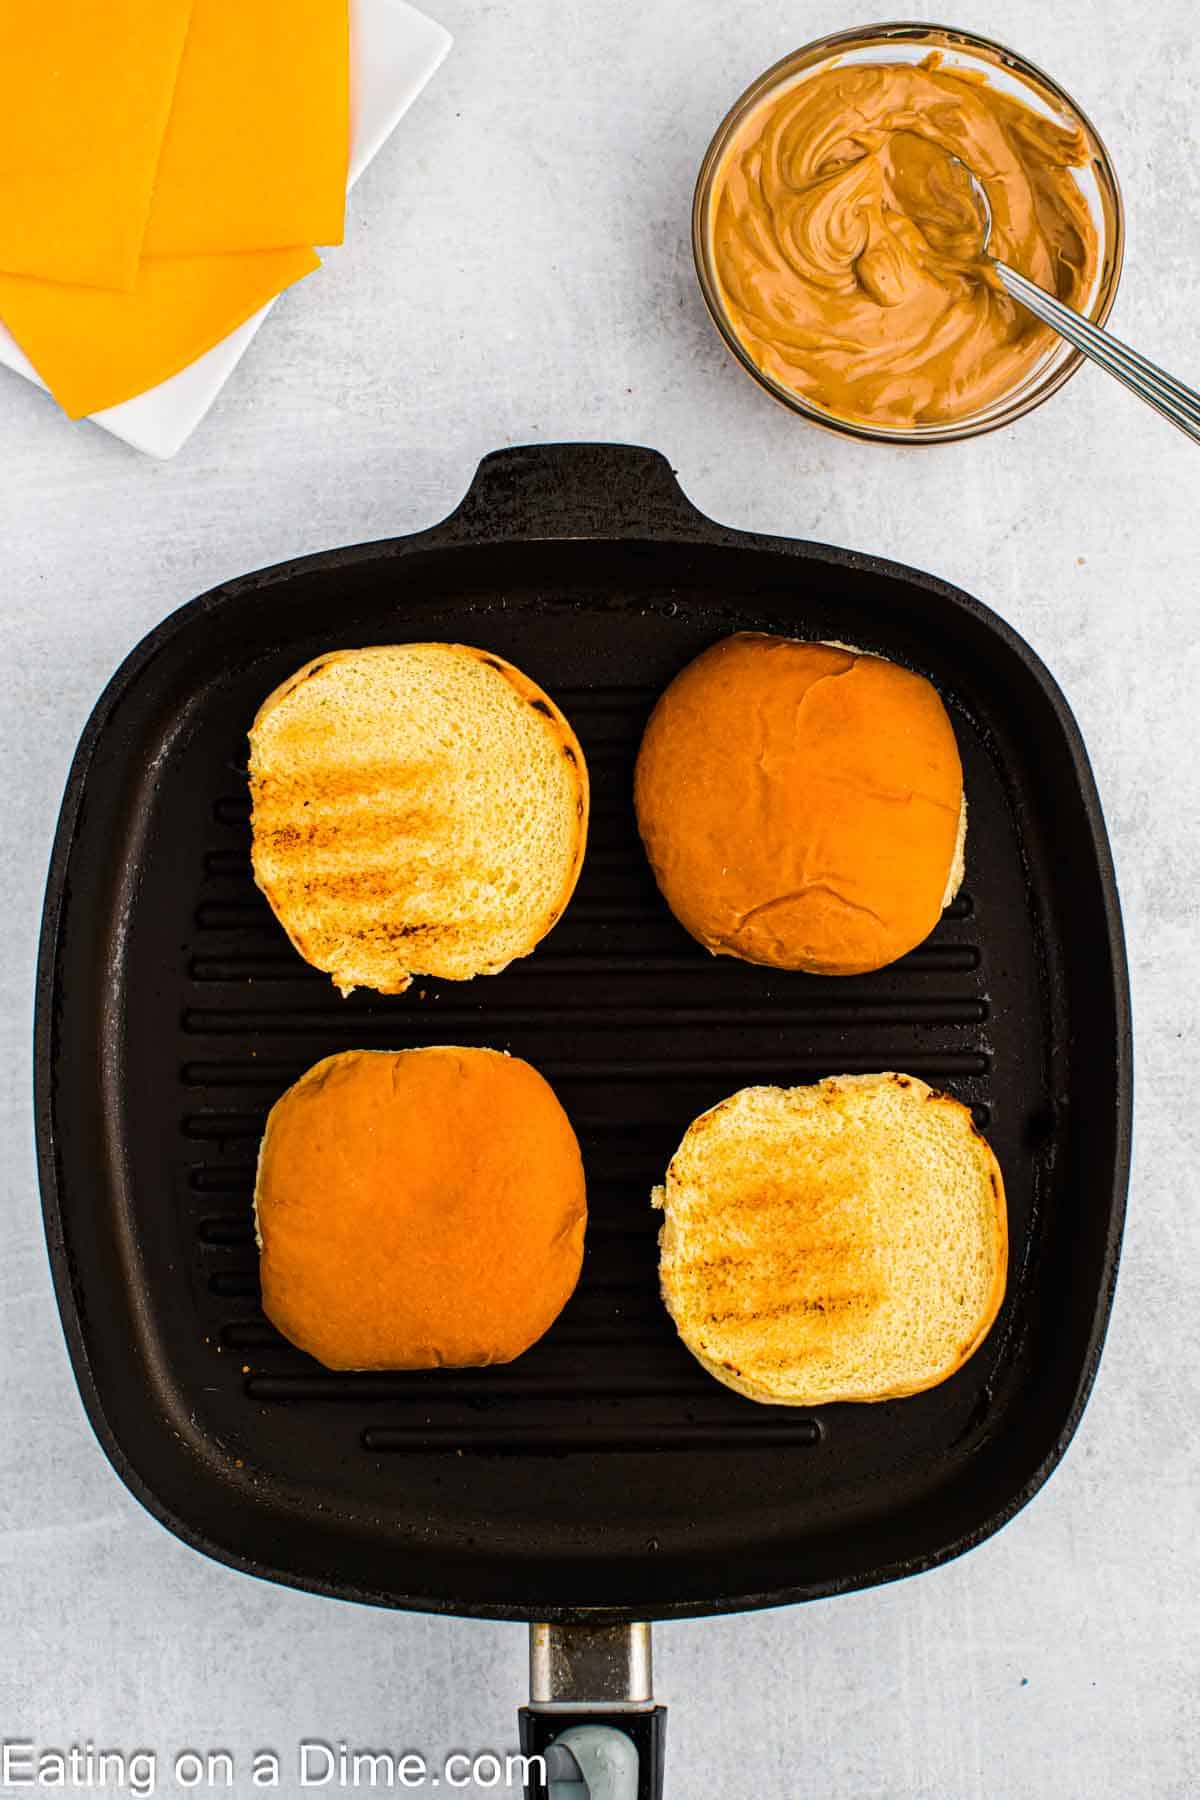 Toasted hamburger buns in a skillet with a plate of slice of cheese and a bowl of a creamy peanut butter